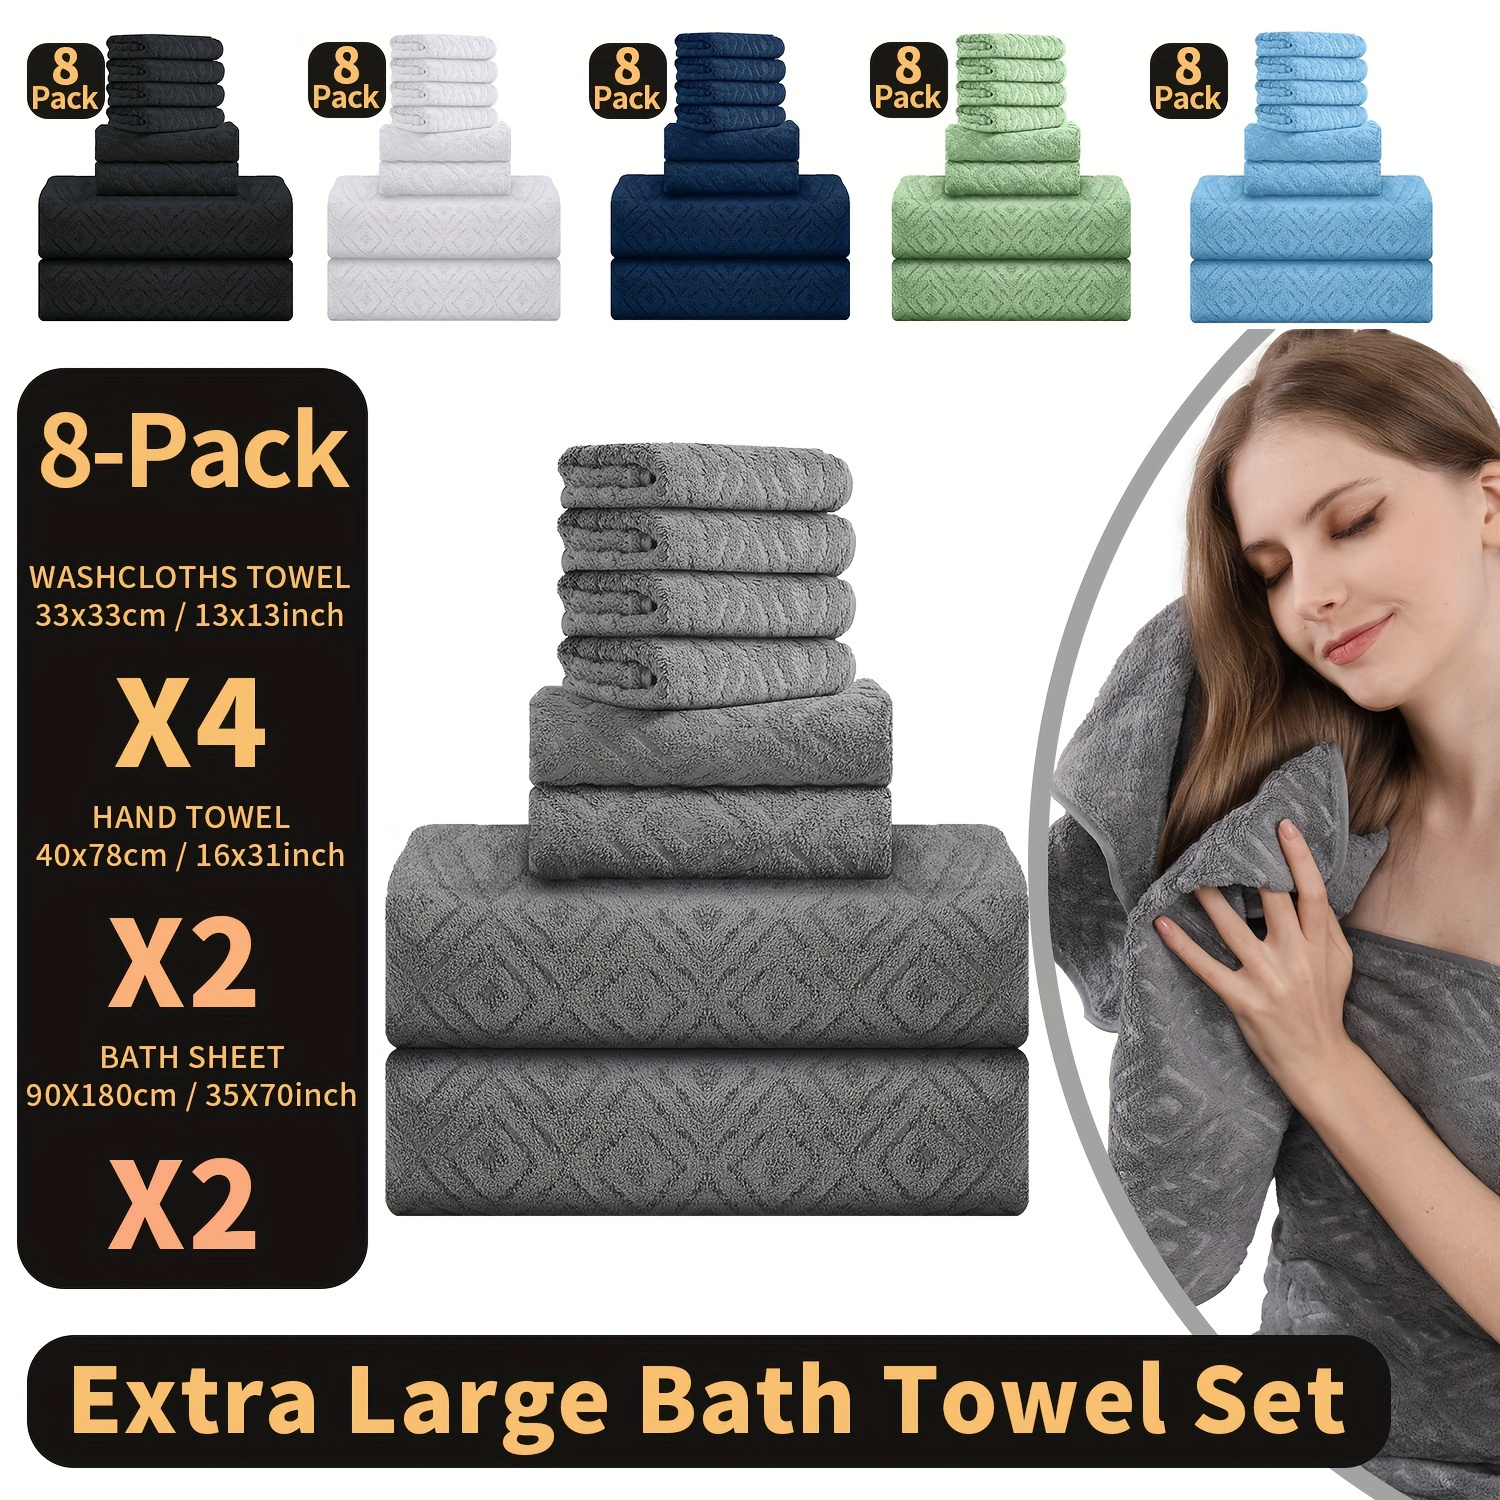 

8 Piece Oversized Bath Towels, 35 X 70 Inches Bathroom Towel, Super Soft, Highly Absorbent, Quick Dry, 600gsm, Includes 2 Large Bath Towels & 2 Hand Towels & 4 Towels For Spa Bathroom Gym Hotel